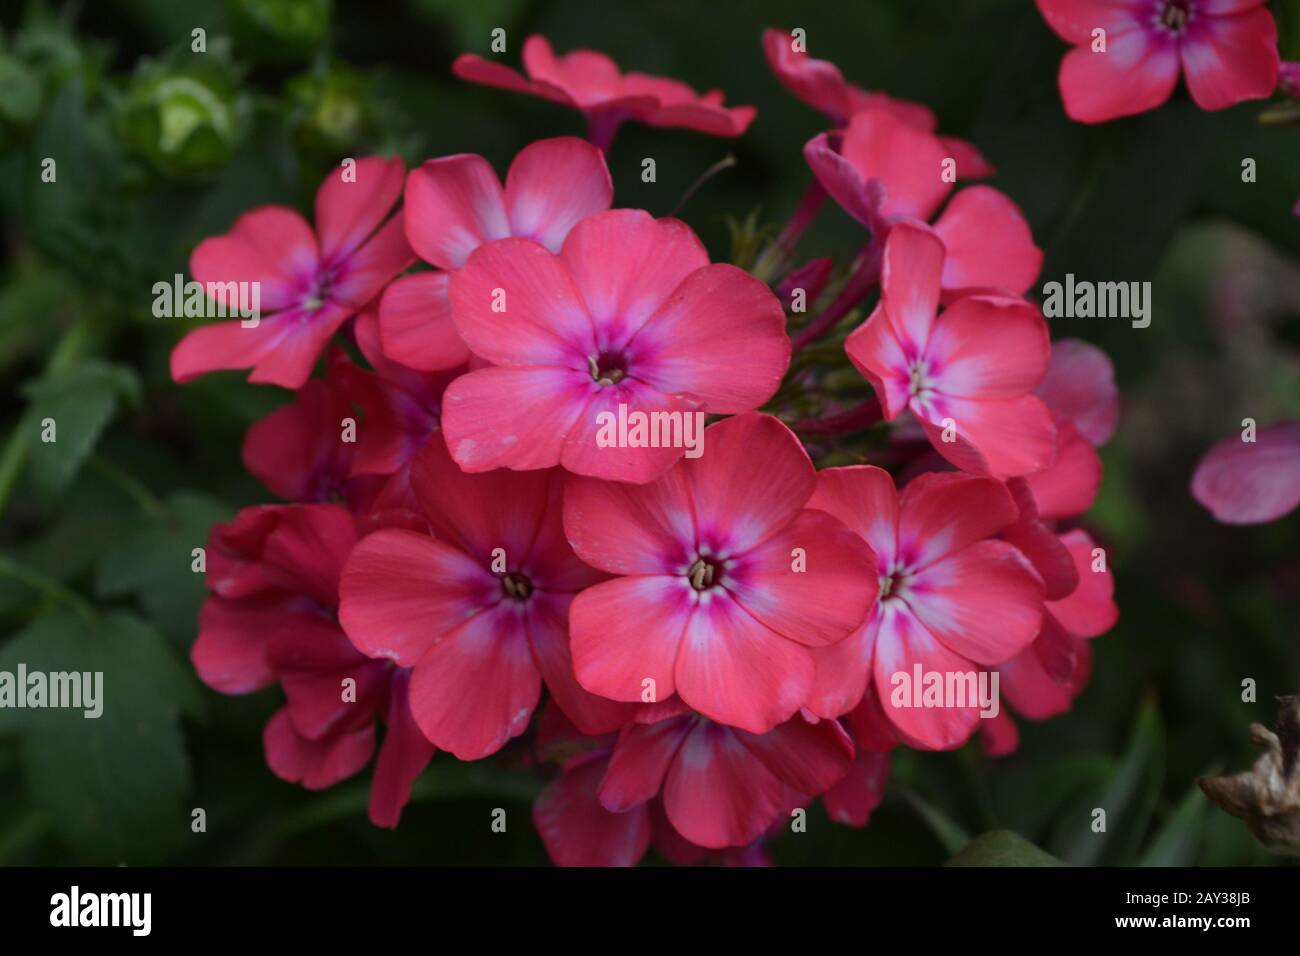 Phlox. Polemoniaceae. Beautiful inflorescence. Flowers pink. Nice smell. Growing flowers. Flowerbed. Garden. Floriculture. On blurred background. Clos Stock Photo